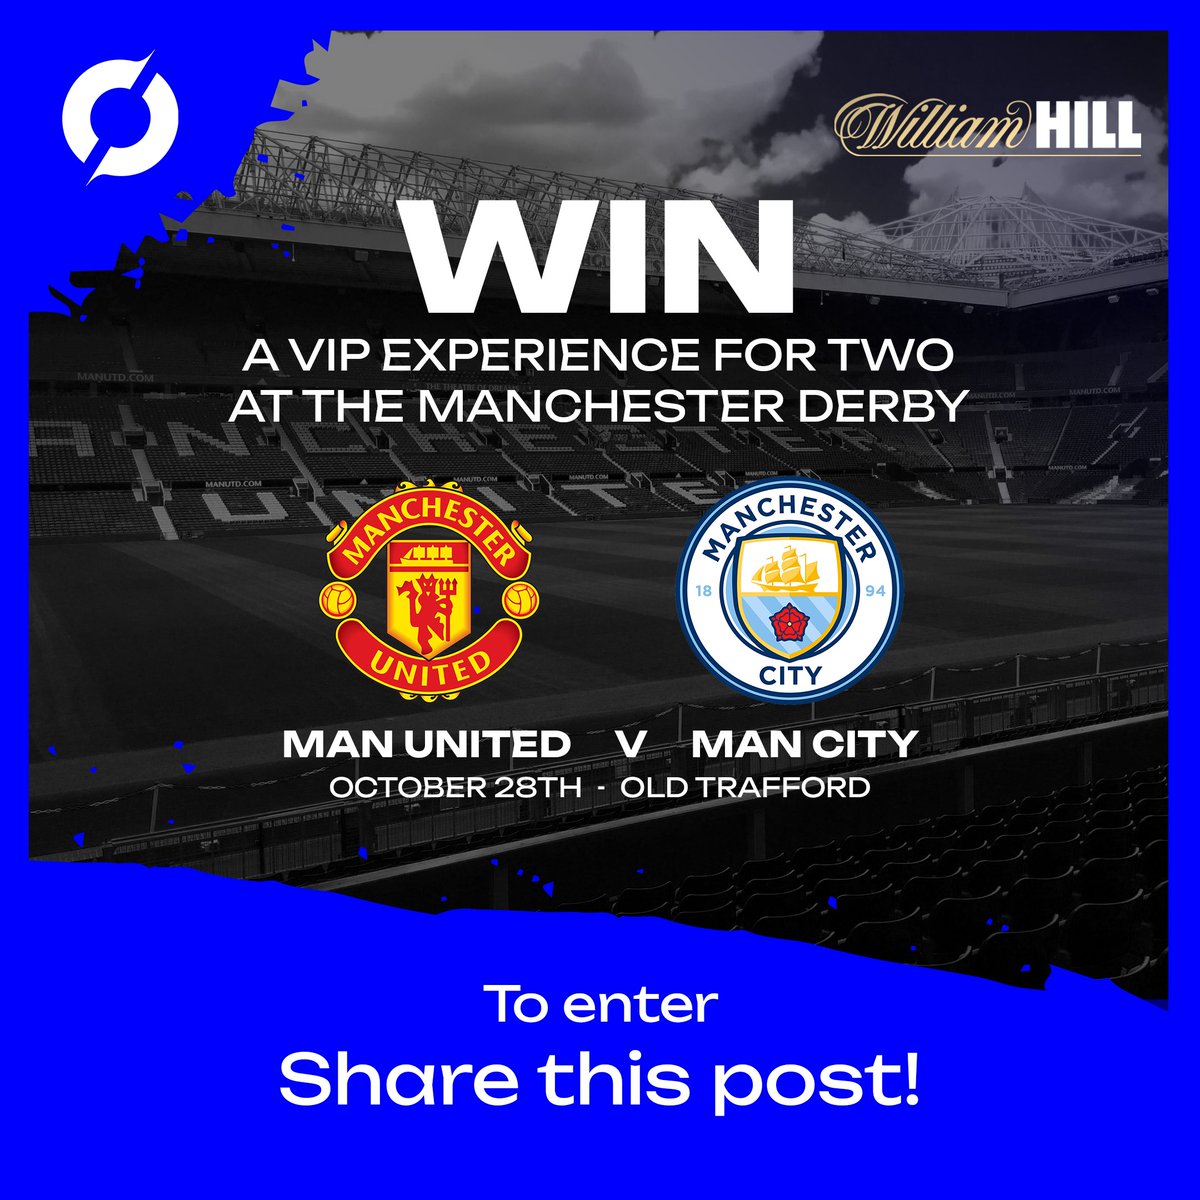 🚨Competition time!🚨 We've teamed up with @WilliamHillIreland to give away a trip to the Manchester Derby! Simply like and repost to win. #KnowTheGame